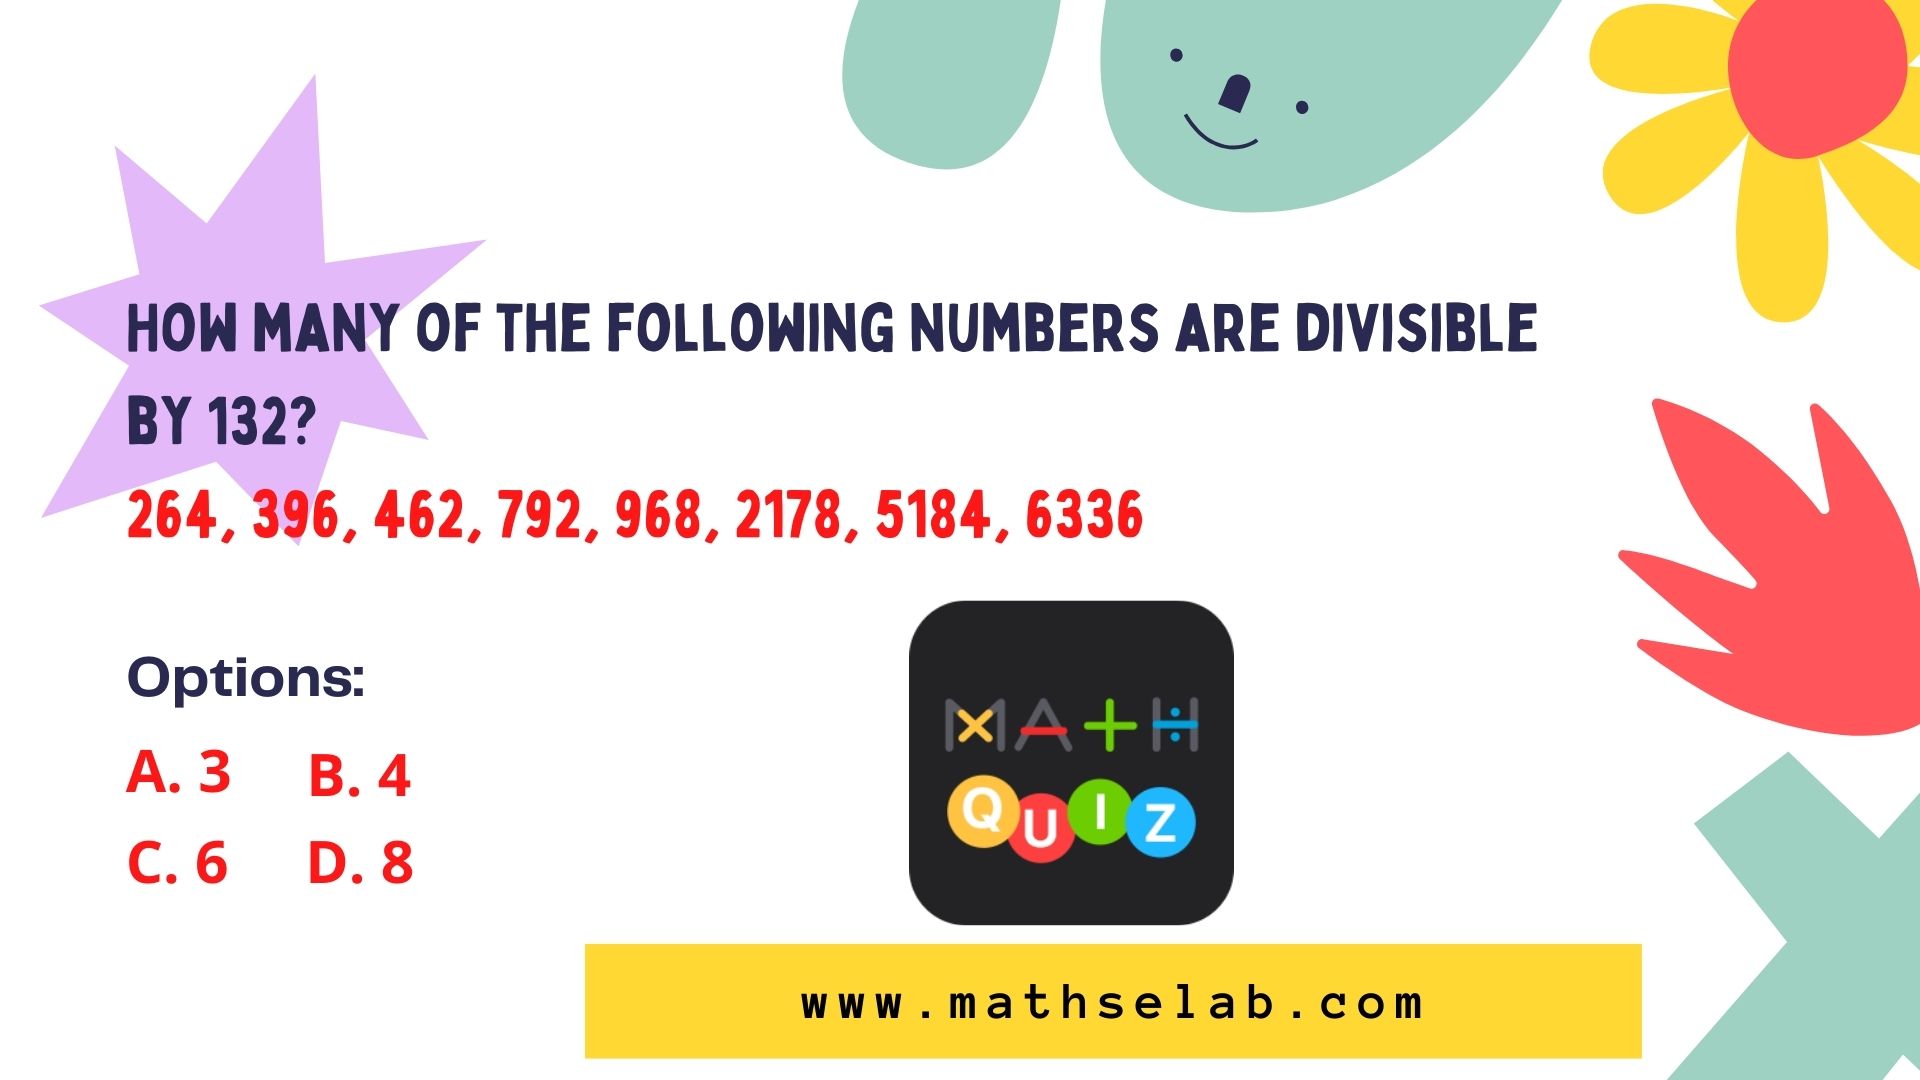 How many of the following numbers are divisible by 132?<br>264, 396, 462, 792, 968, 2178, 5184, 6336